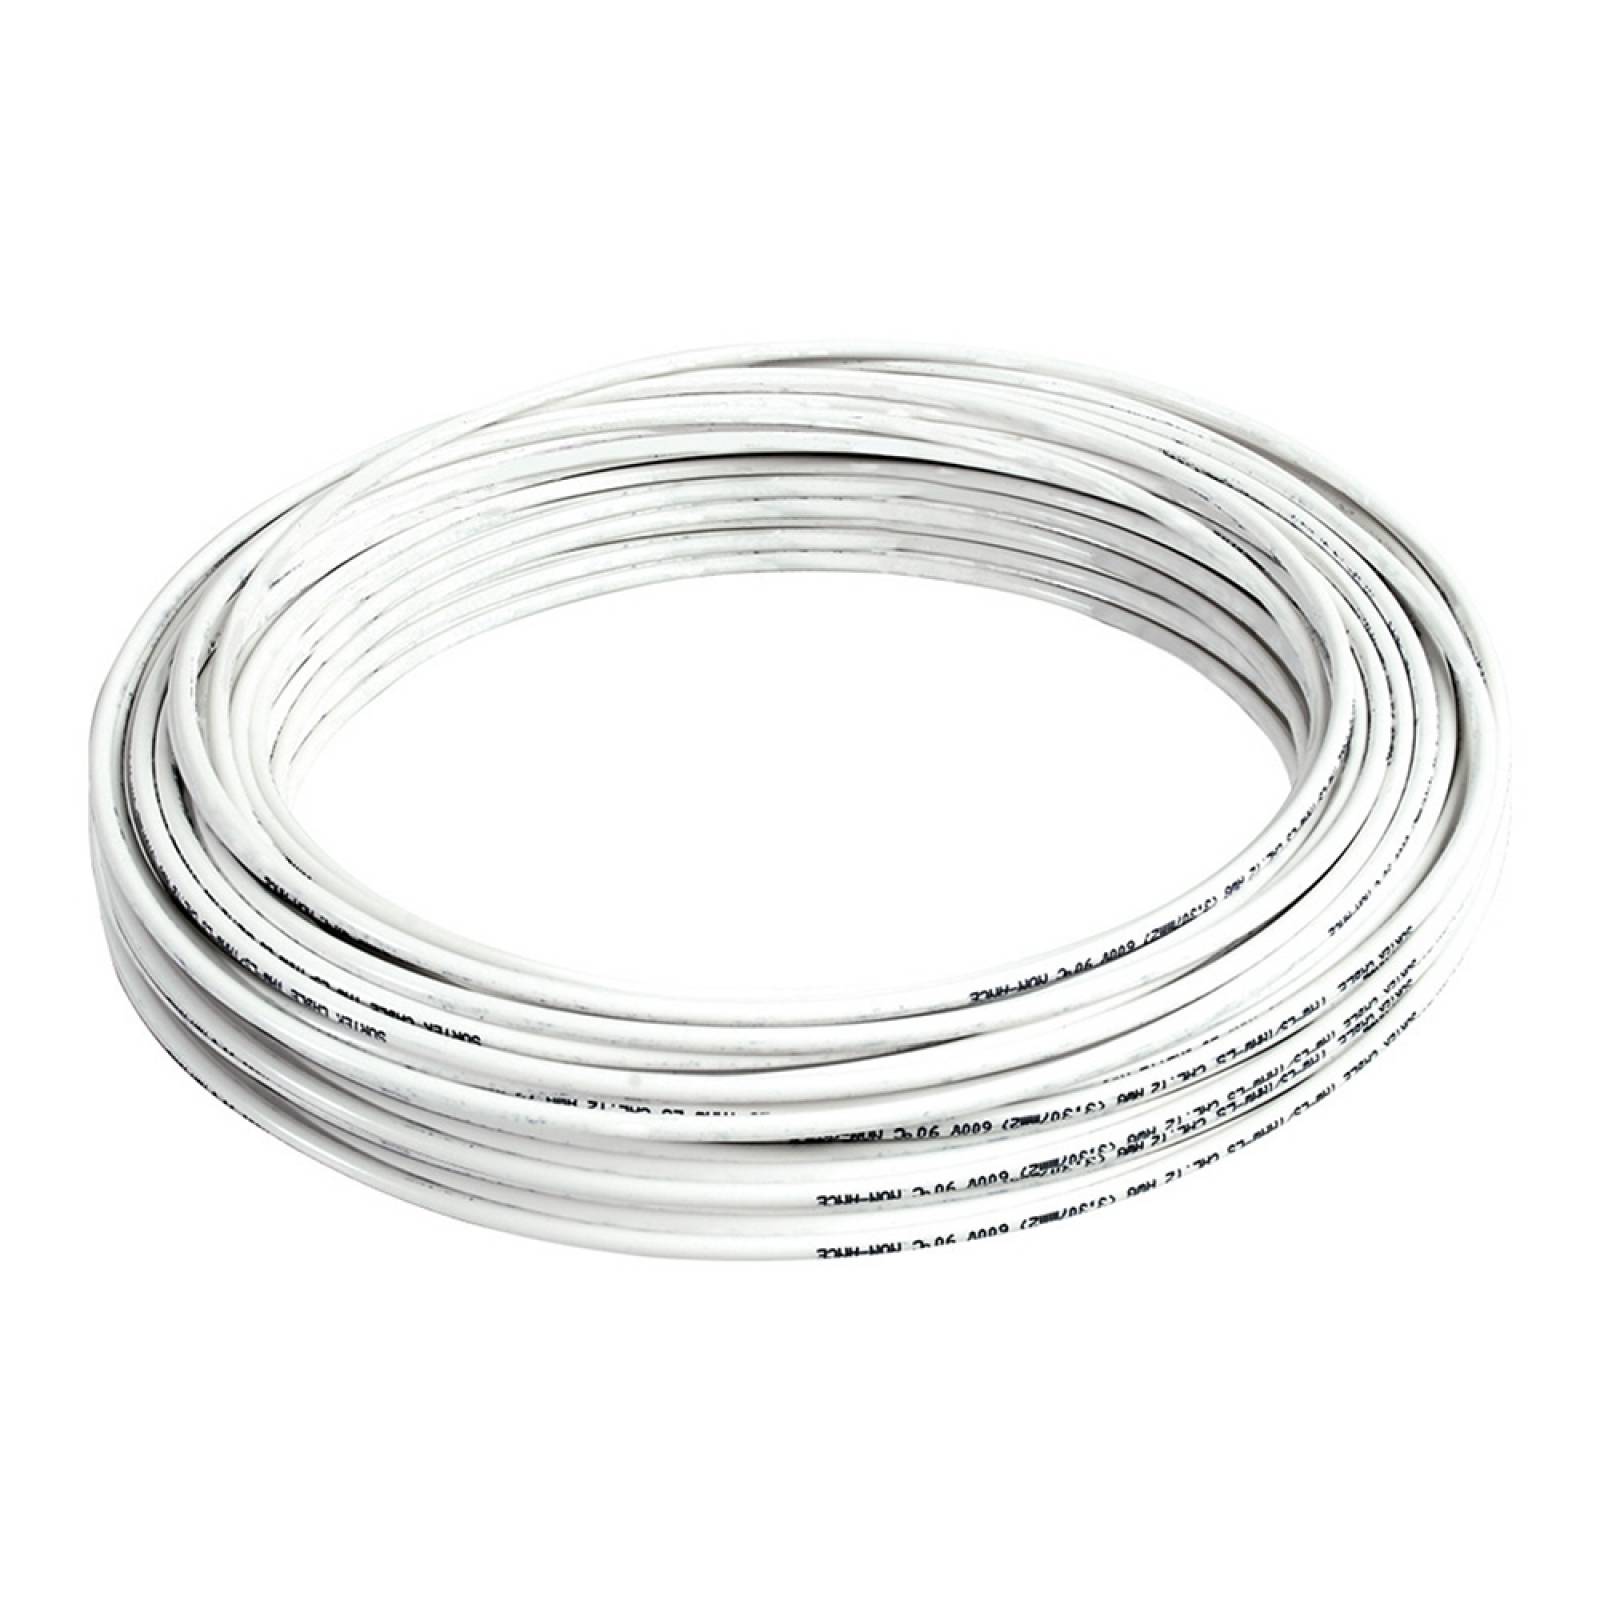 Cable Eléctrico Tipo Thw-ls/thhw-ls Cal12 100m Blanco 136921 